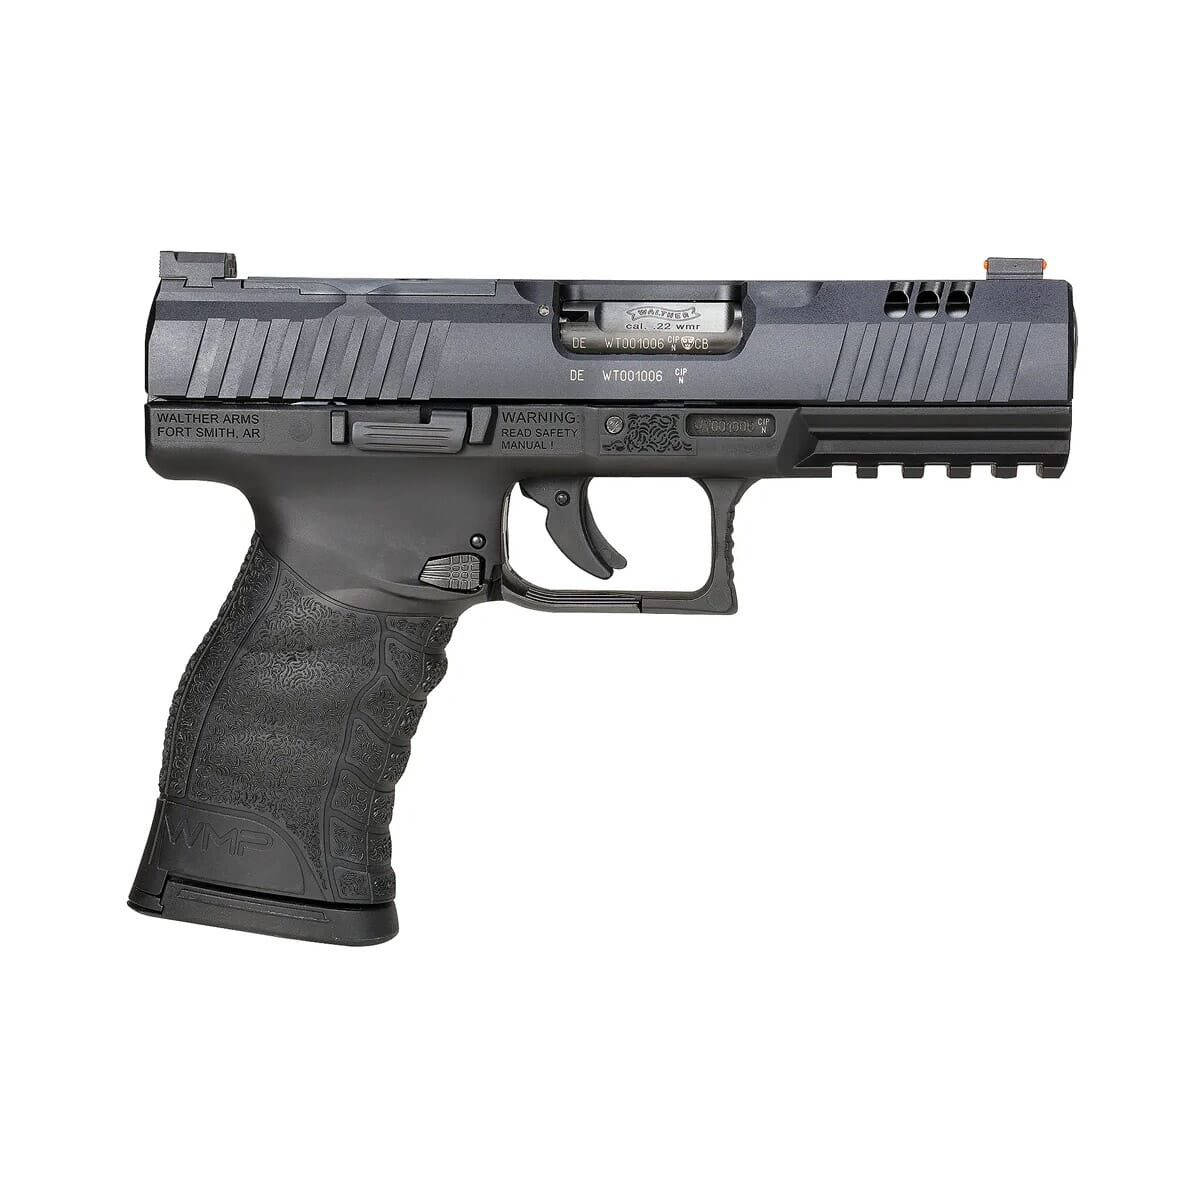 Walther Arms Wmp 22 Wmr 45 Bbl Optic Ready Pistol W3 Optic Plates And 2 10rd Mags 5220302 8436